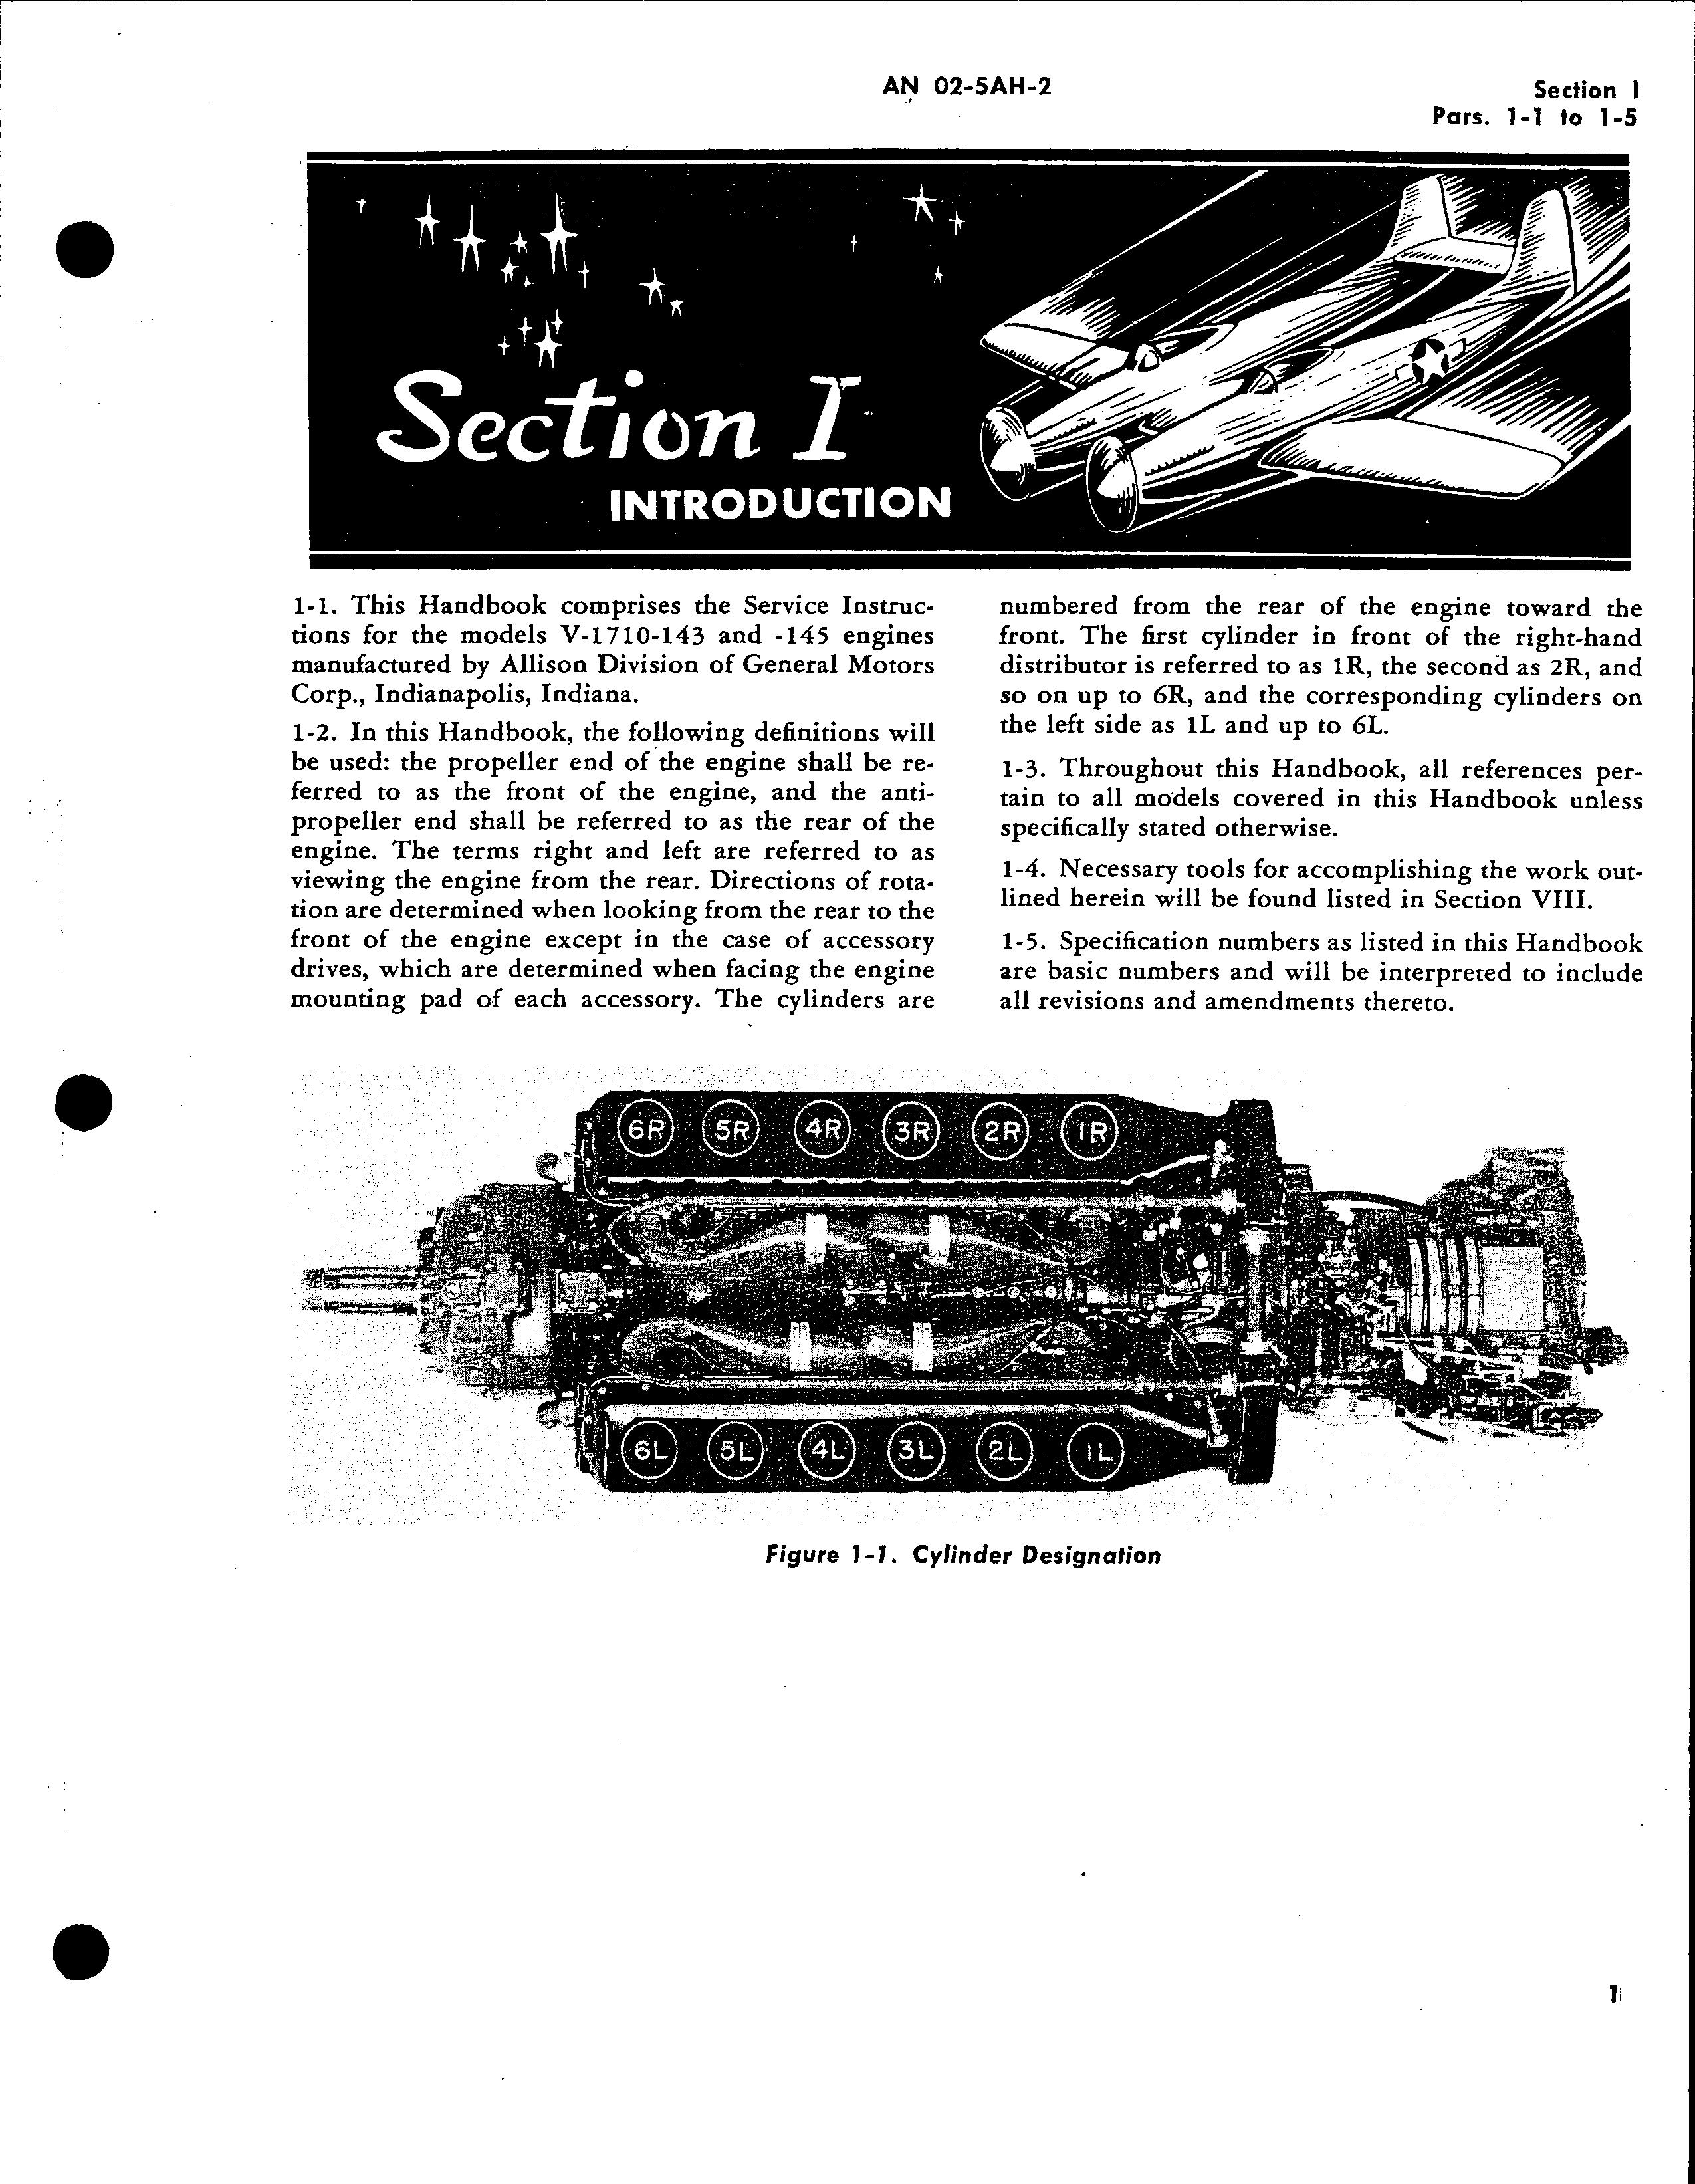 Sample page 5 from AirCorps Library document: Service Instructions for Models V-1710-143 and -145 Aircraft Engines